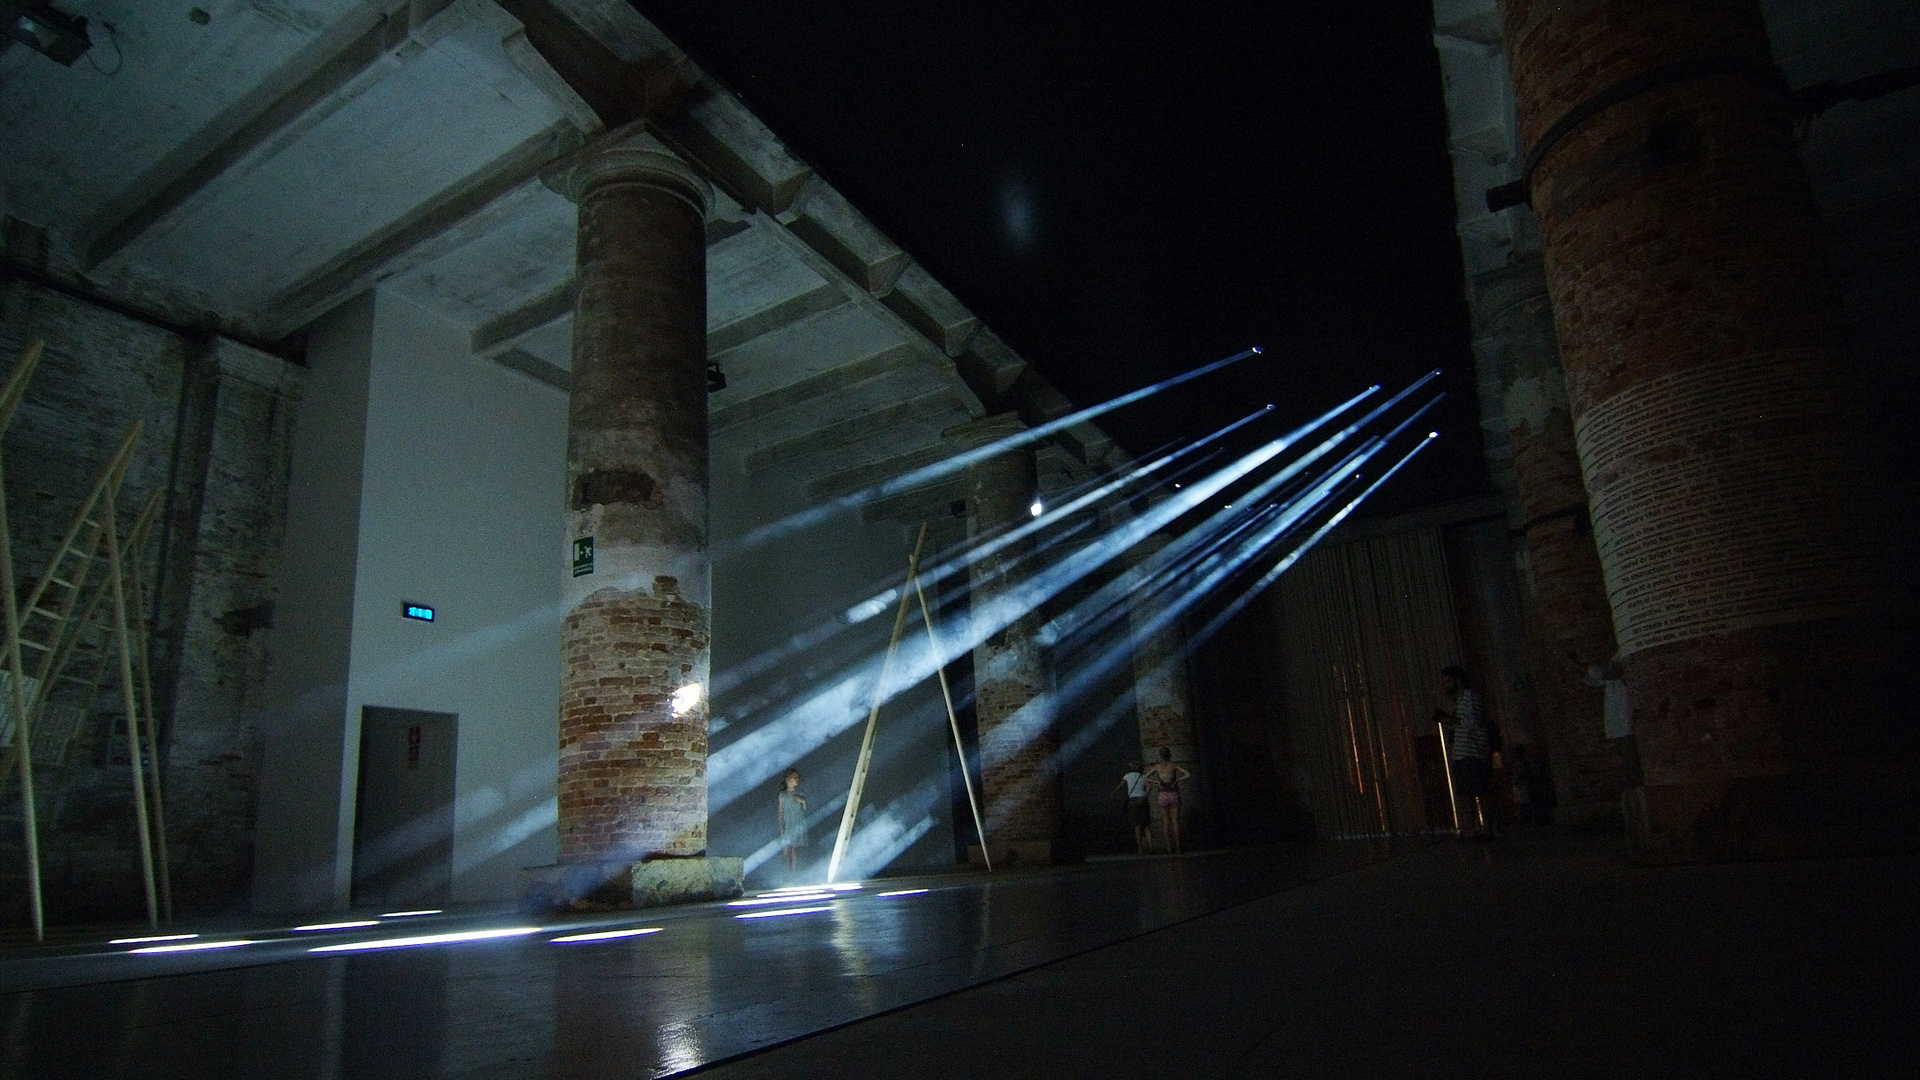 Biennale 2016 "Touch the Light"